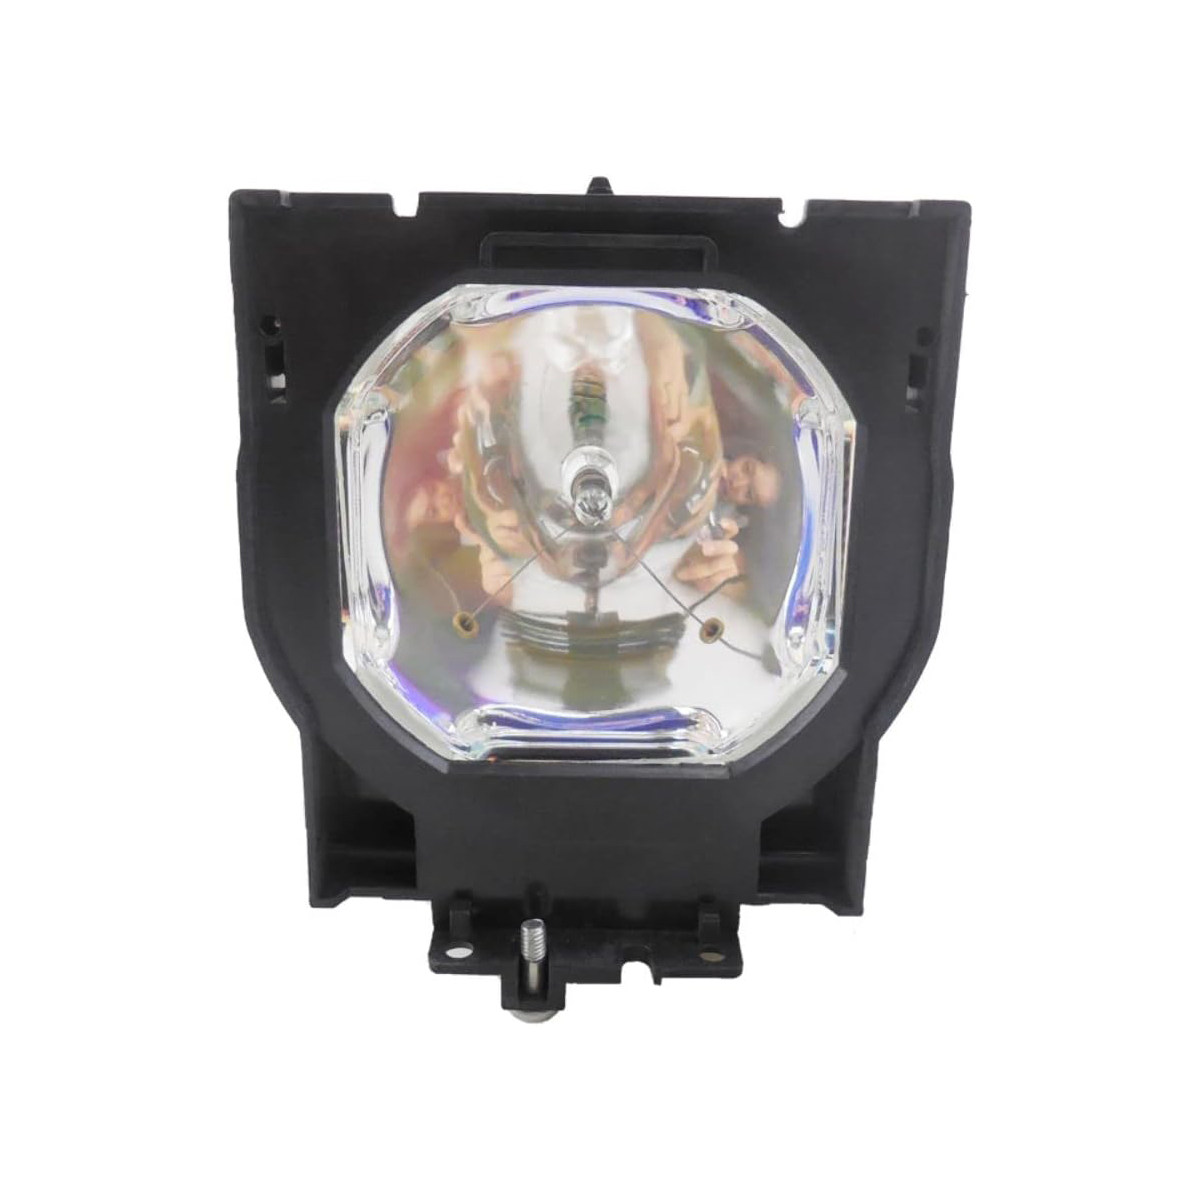 Replacement Projector lamp POA-LMP42 For Sanyo PL C-UF10 PL C-XF40 PL C-XF41